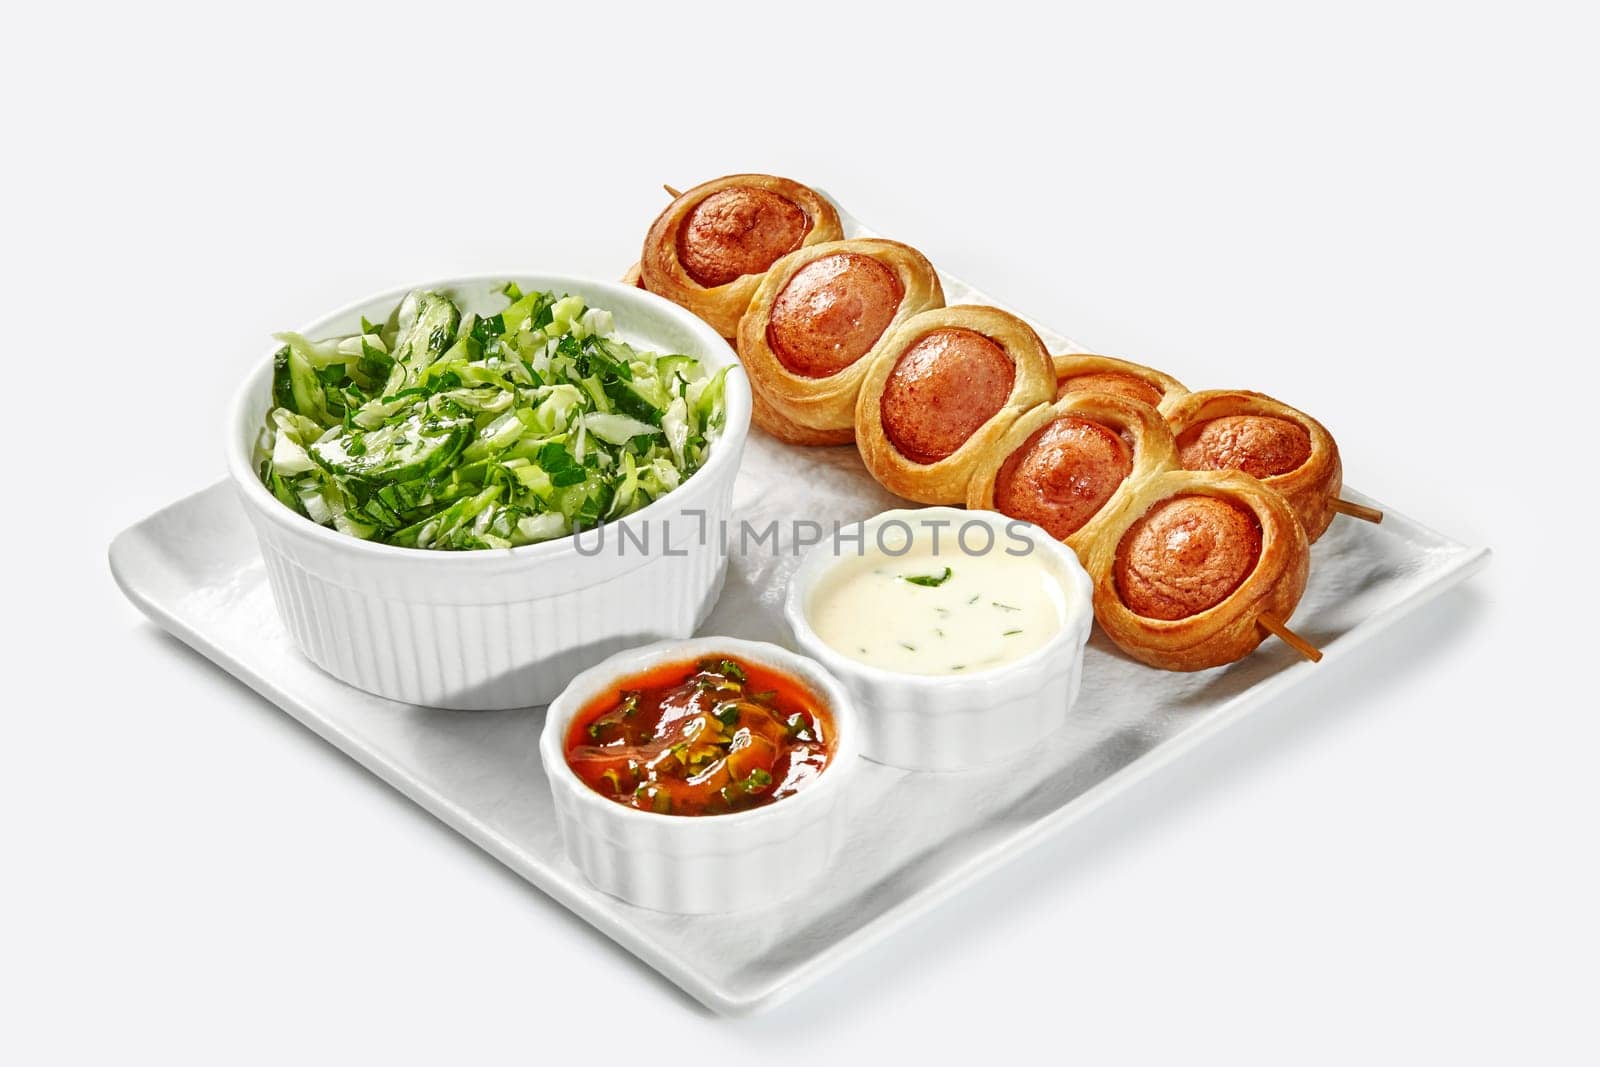 Baked pigs in blanket, green salad, and dips for breakfast by nazarovsergey